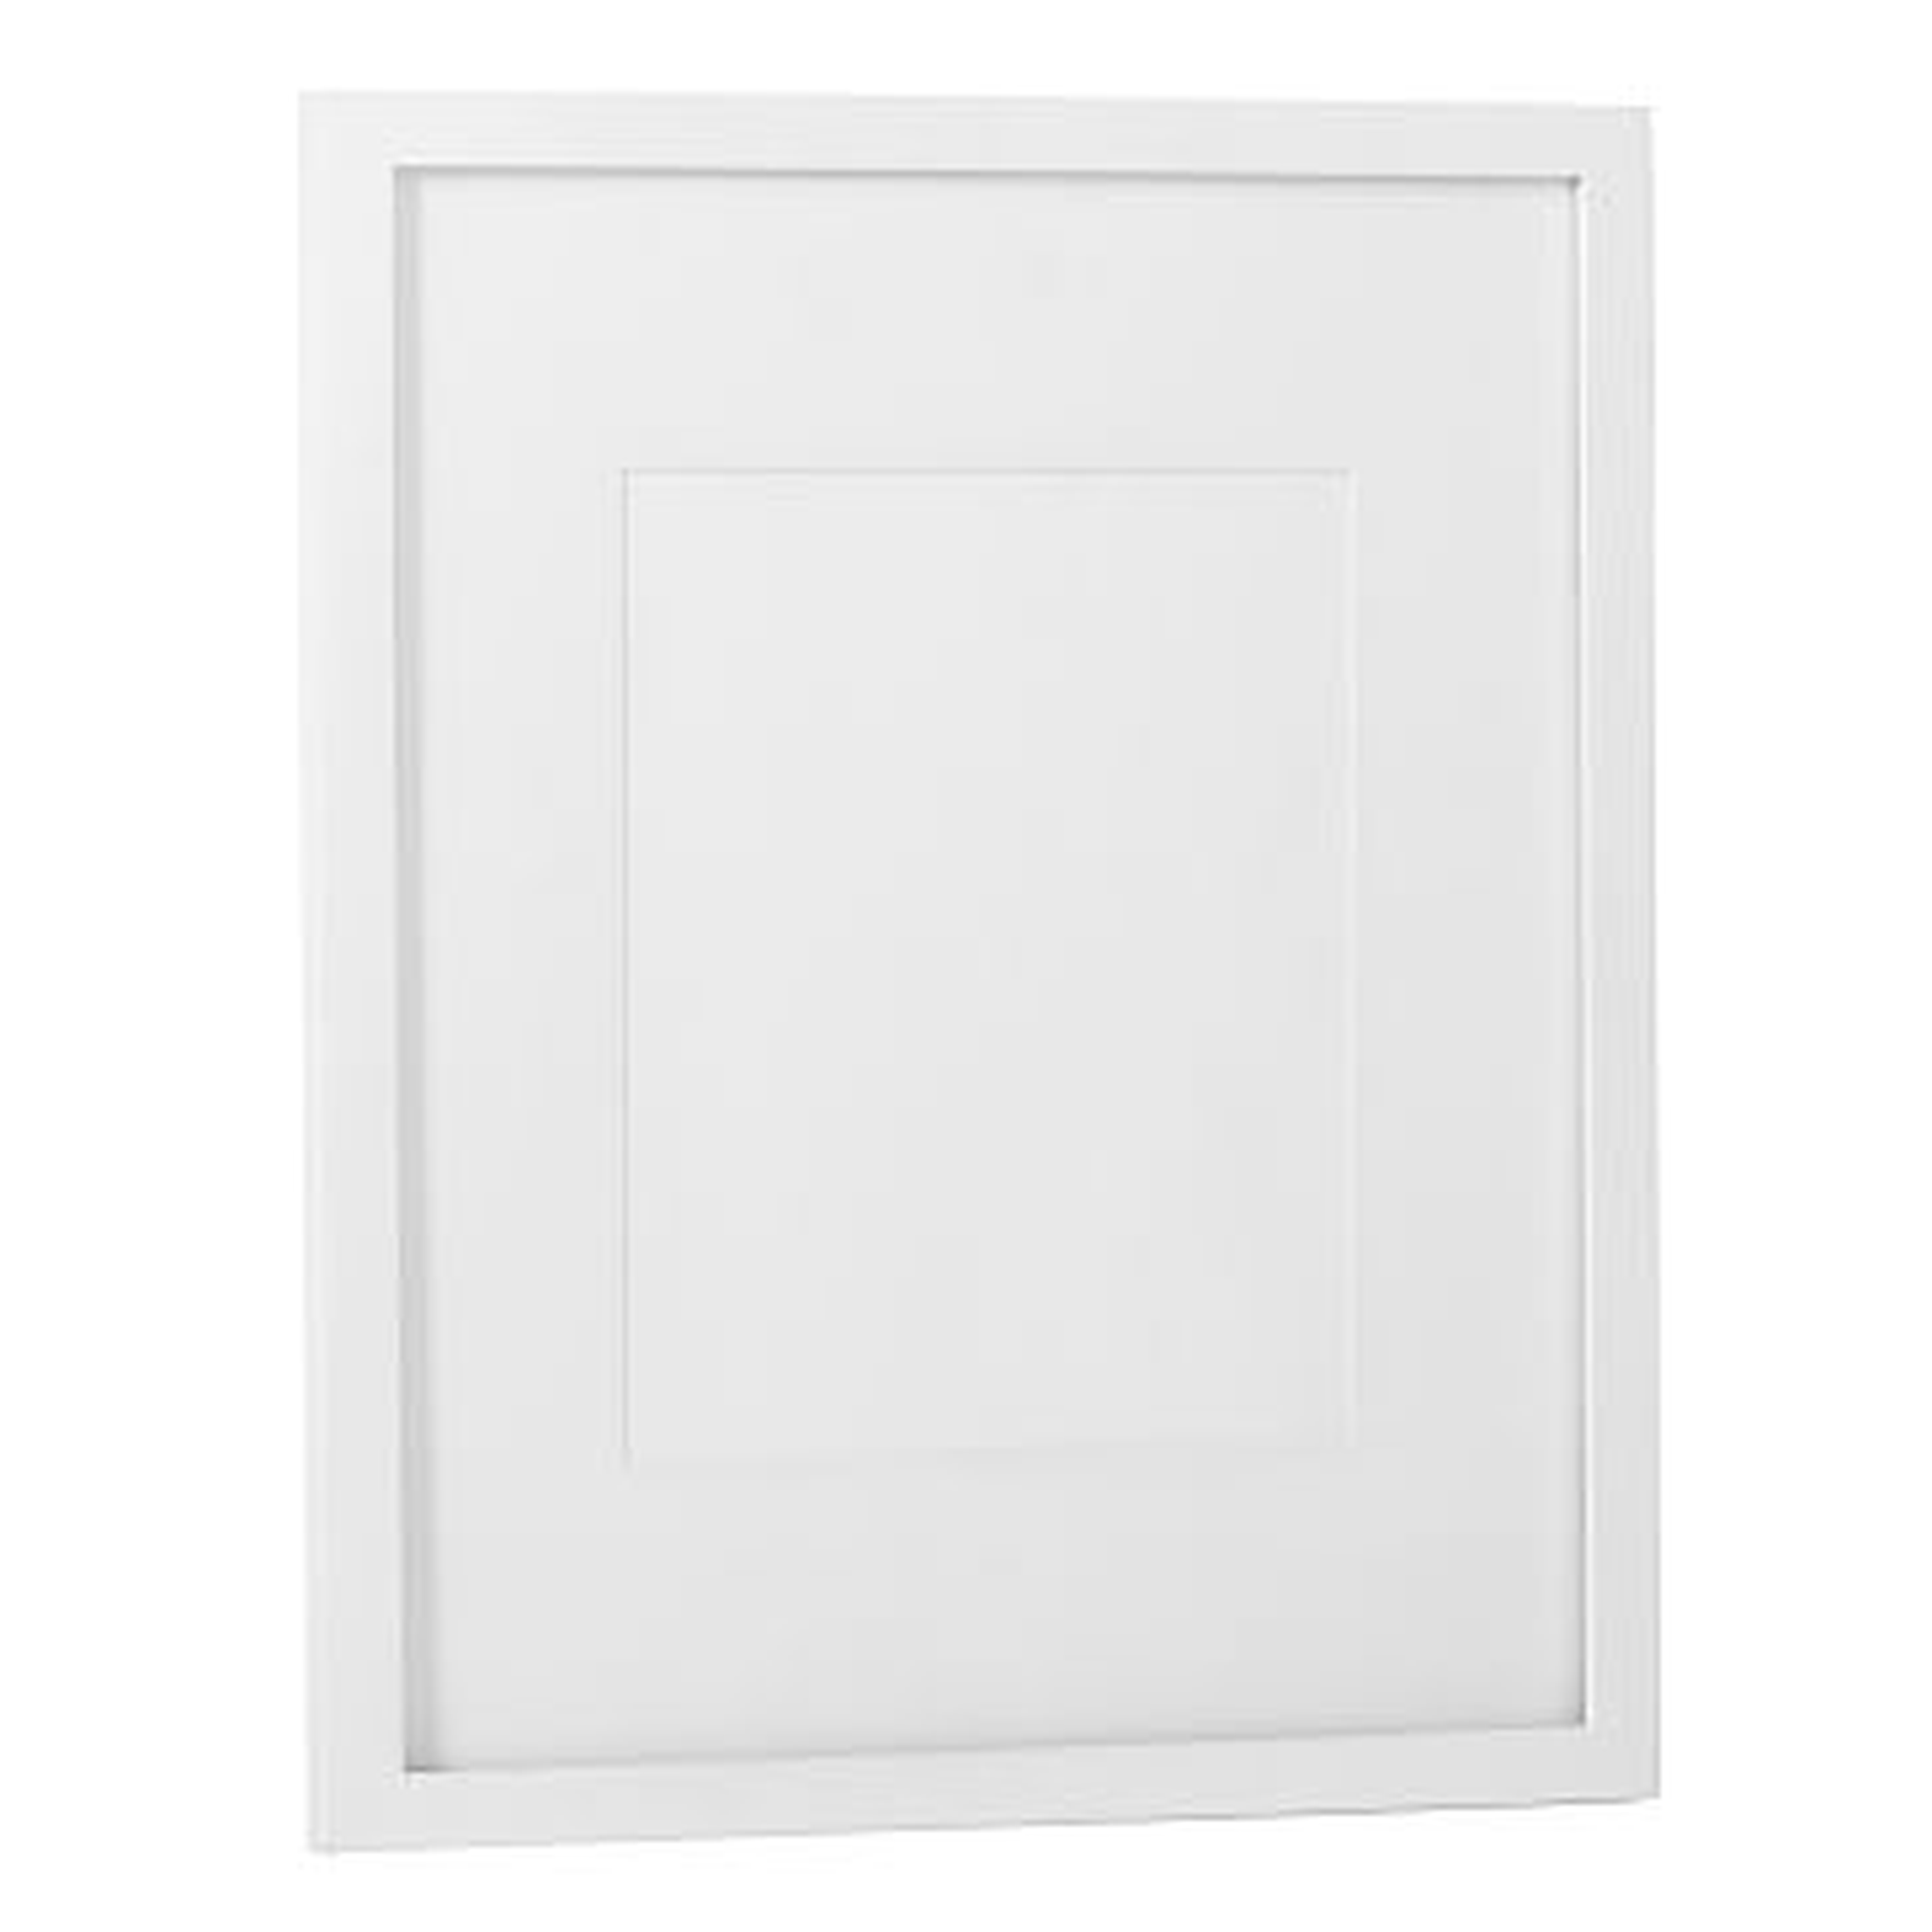 Gallery Frame, 8"x 10" (13" x 16" without mat), White Lacquer - Standard Mat - West Elm